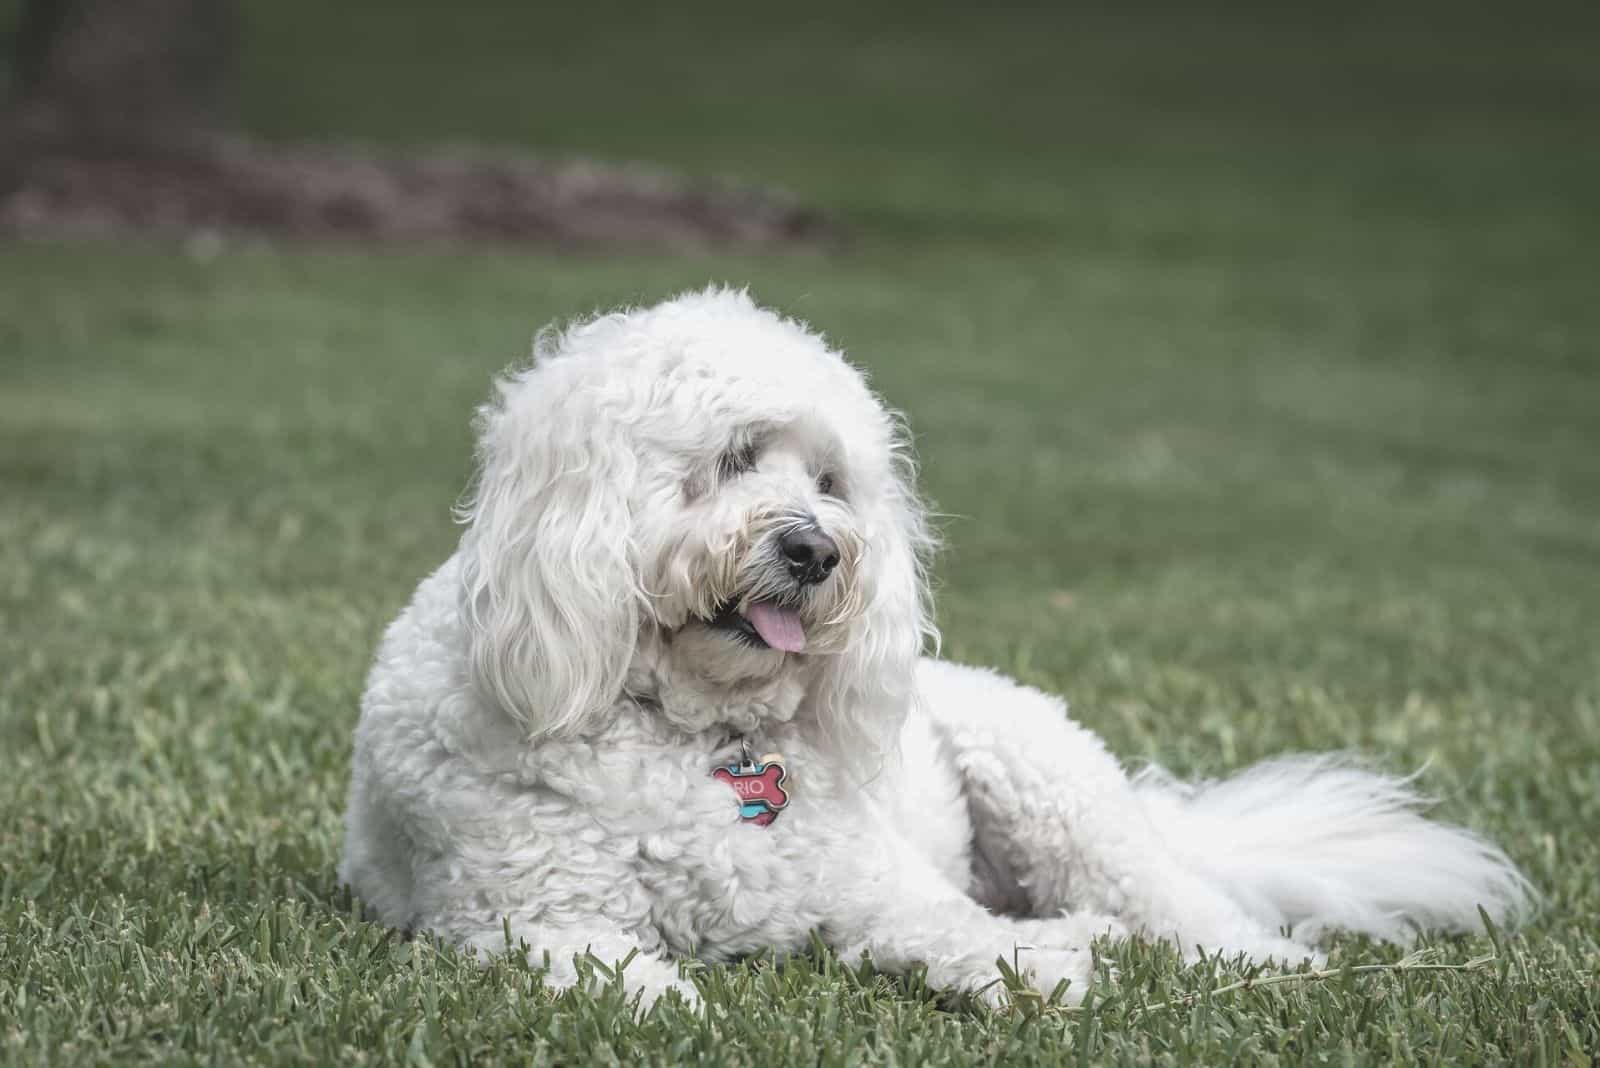 English Goldendoodle resting on the green grass outdoors